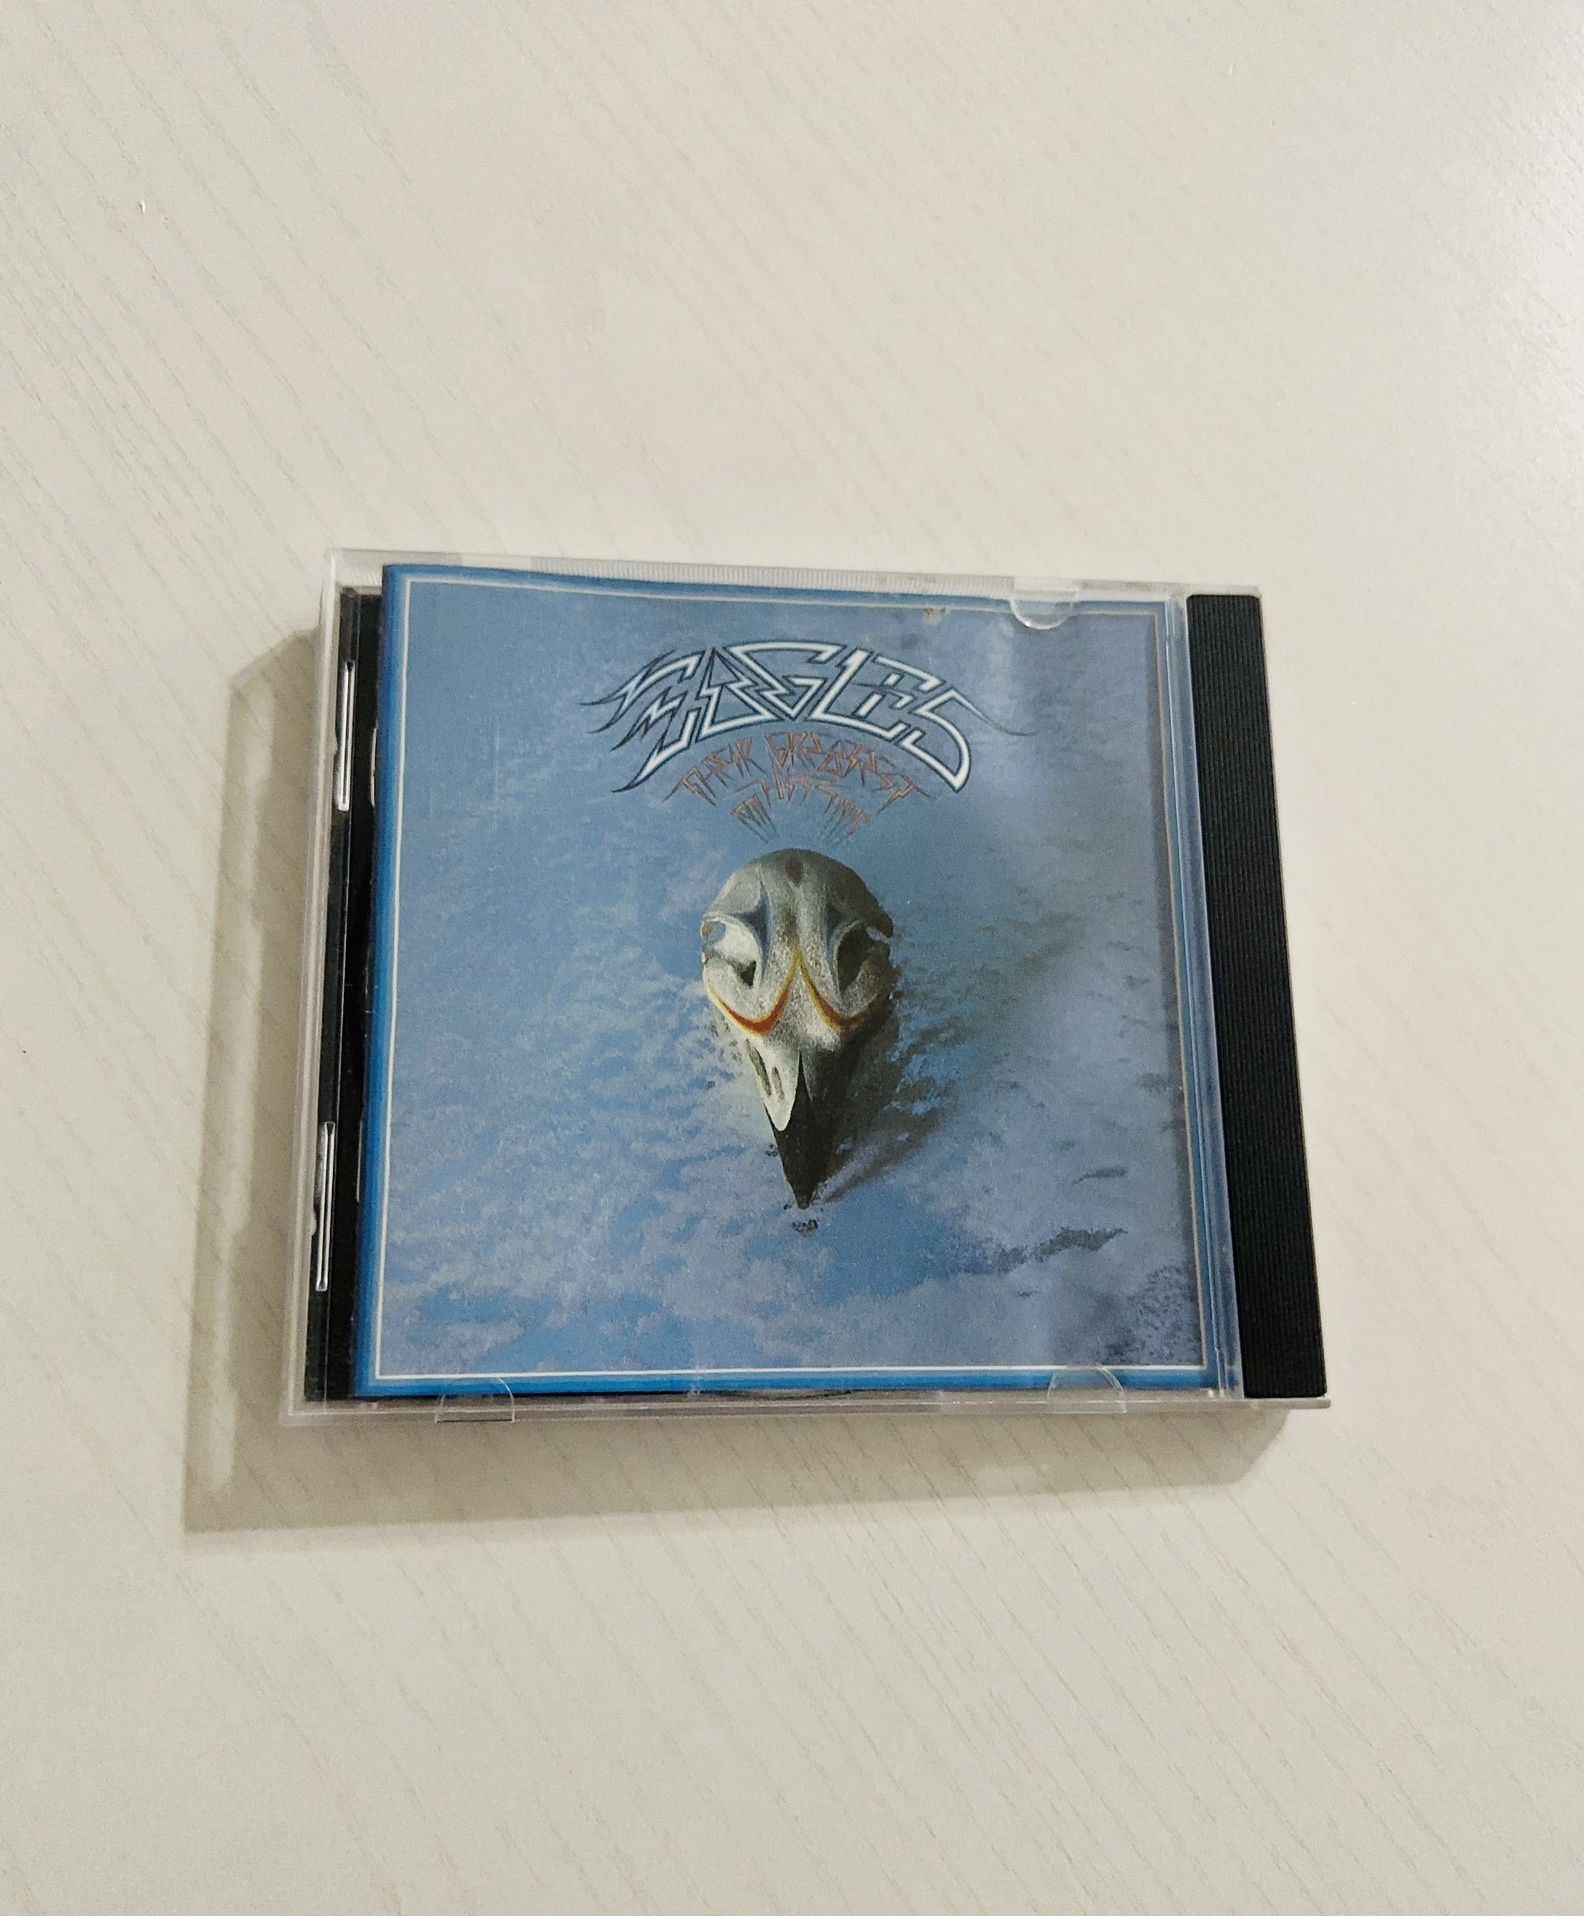 Eagles Greatest Hits CD 1(contact info removed) With Case